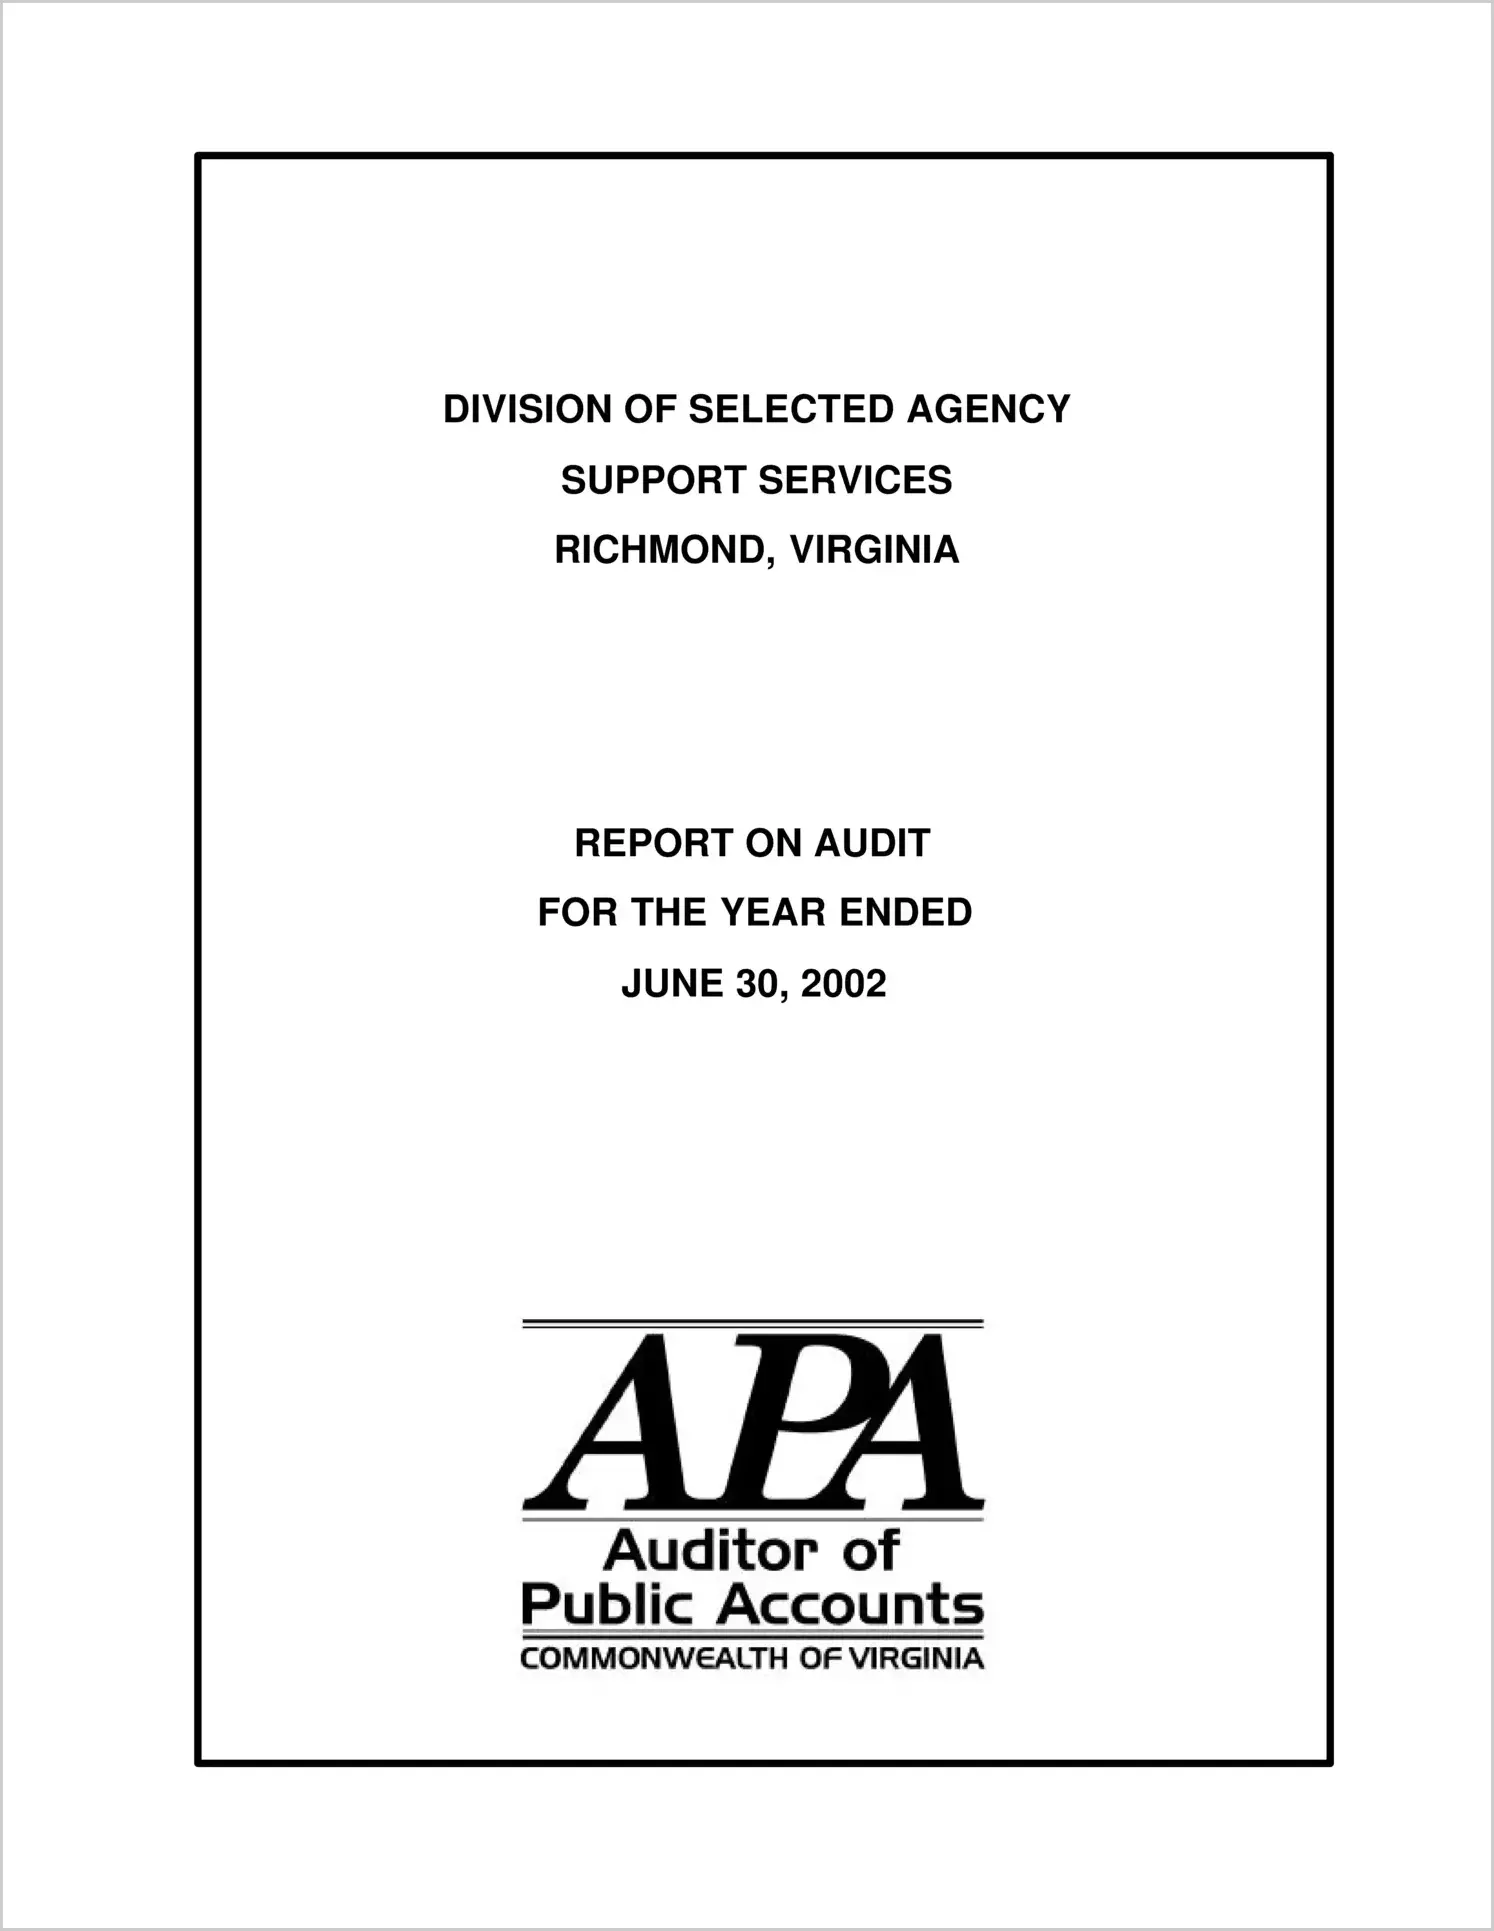 Division of Selected Agency Support Services for the year ended June 30, 2002